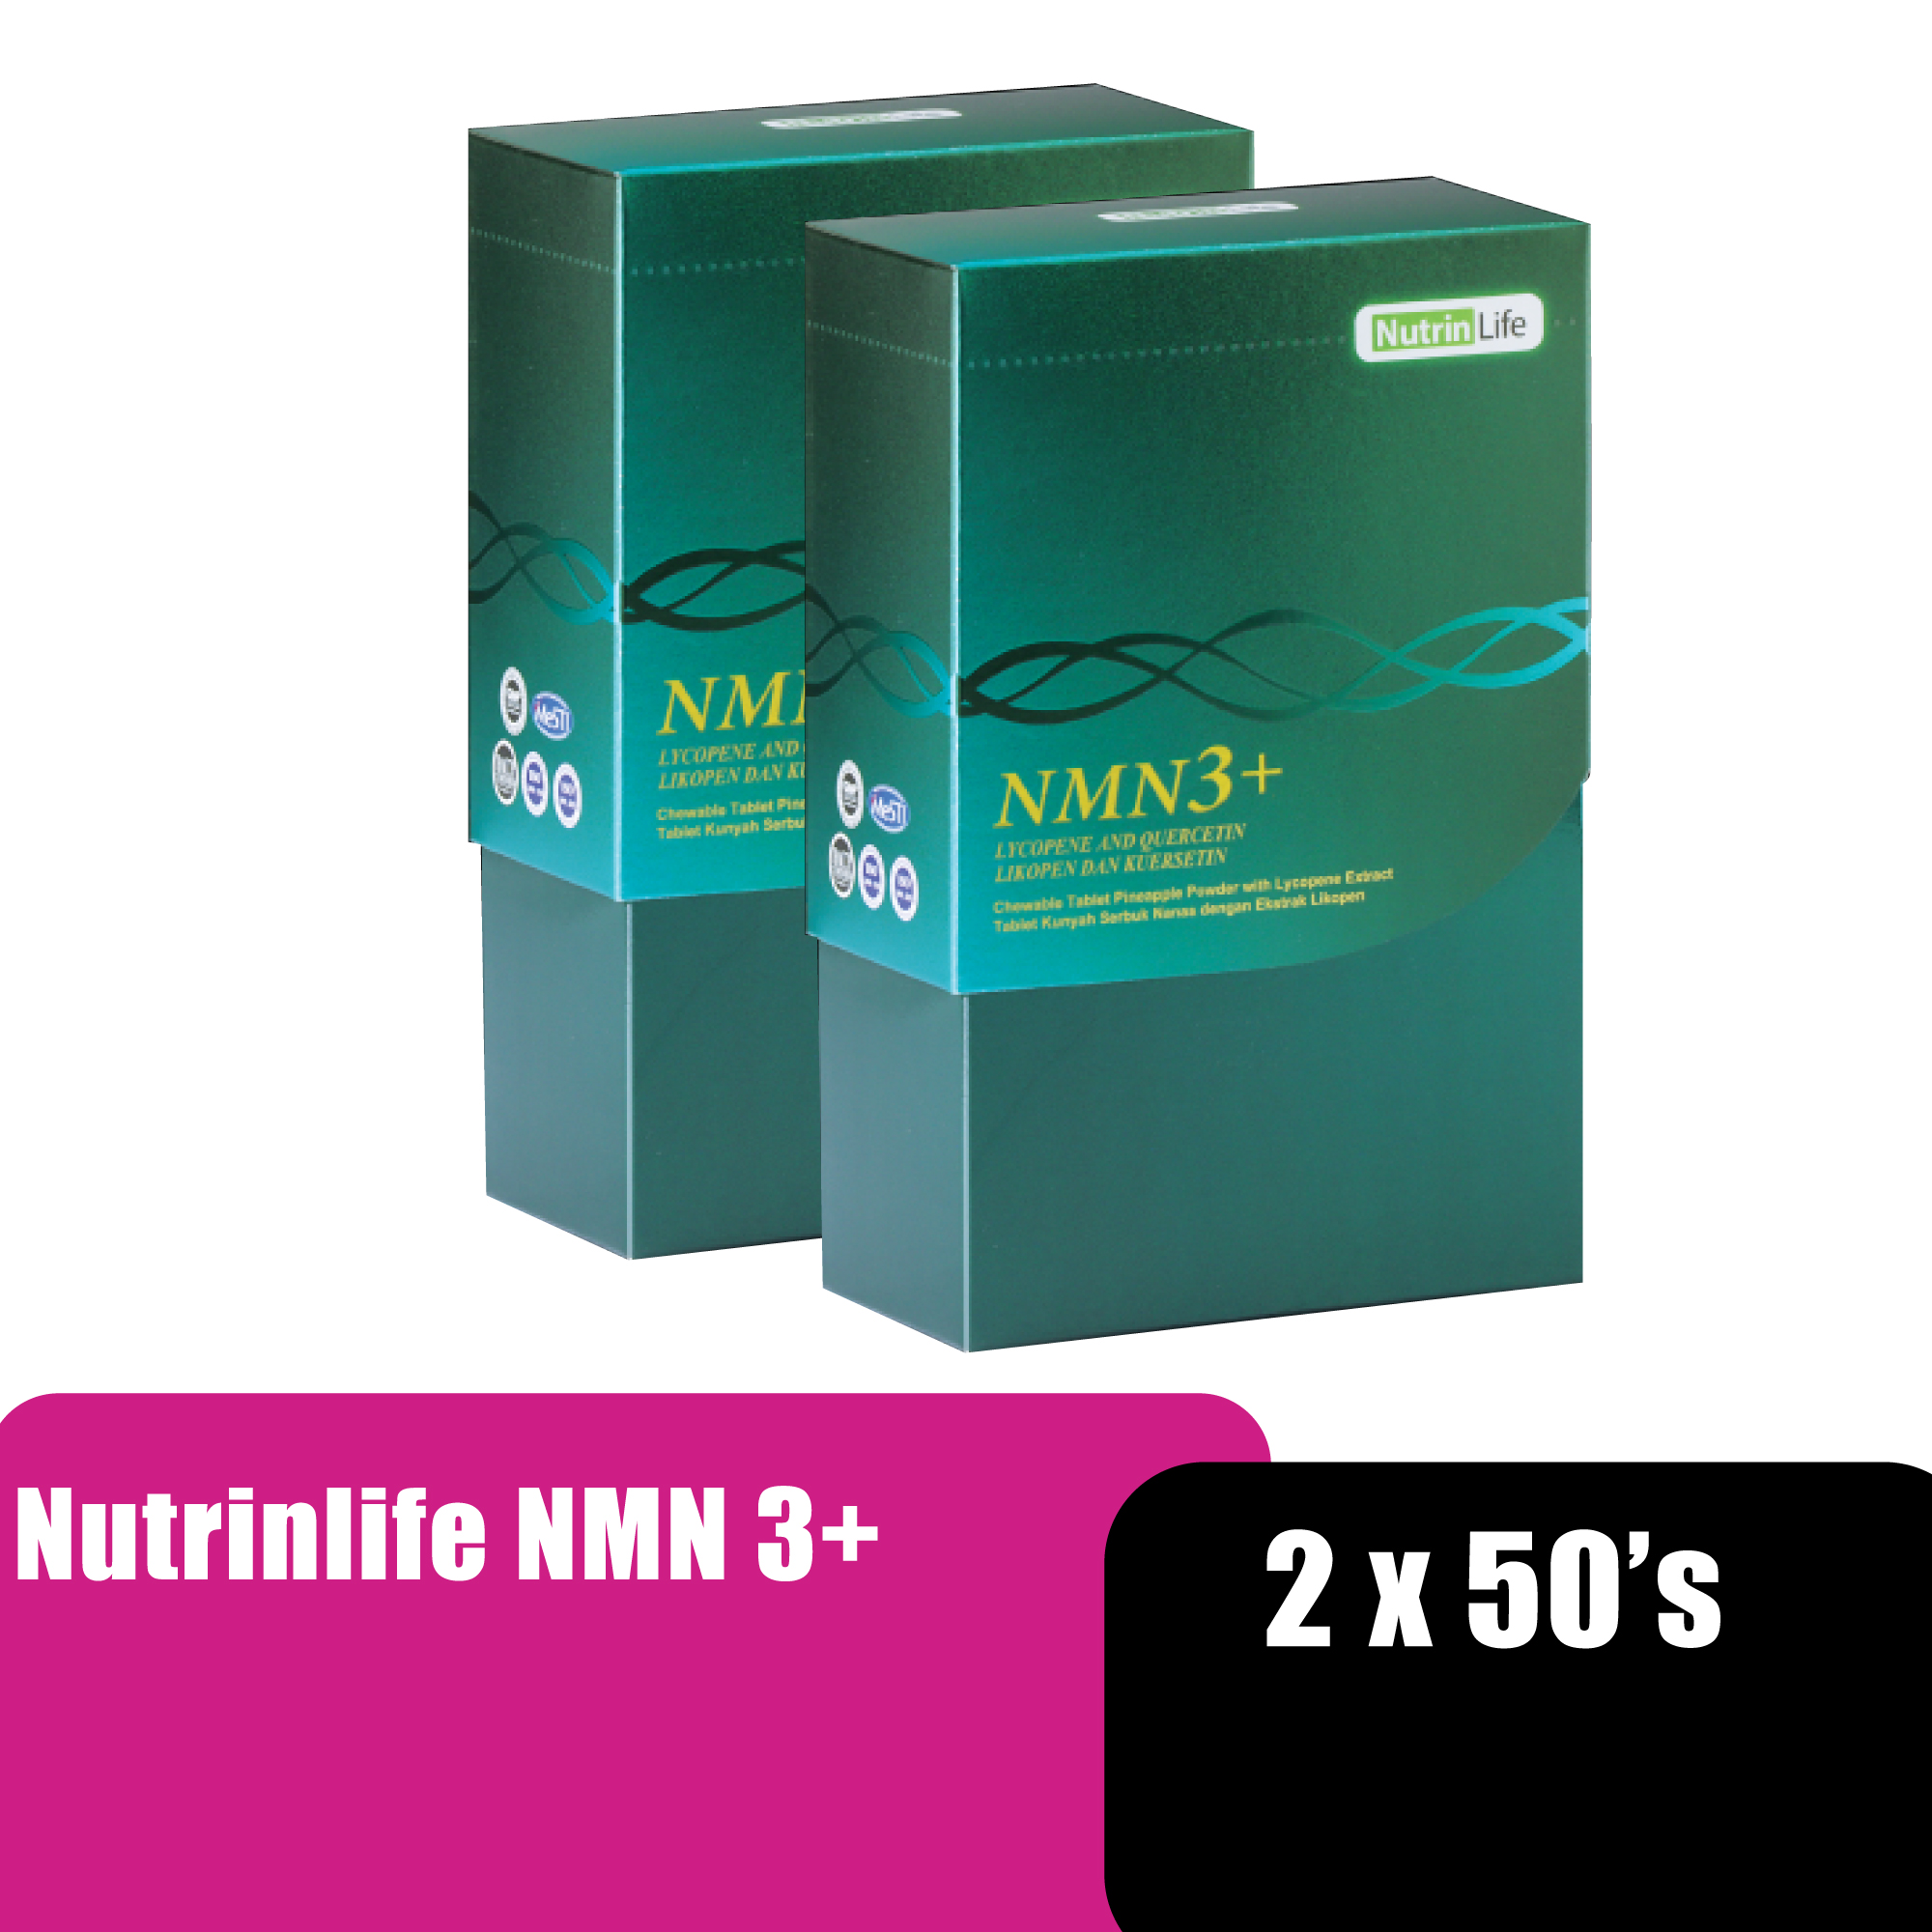 NUTRINLIFE NMN3+ (50's x 2), Weight Loss Supplement, Beauty Slimming Product, Anti Aging, 减肥, 減肥產品